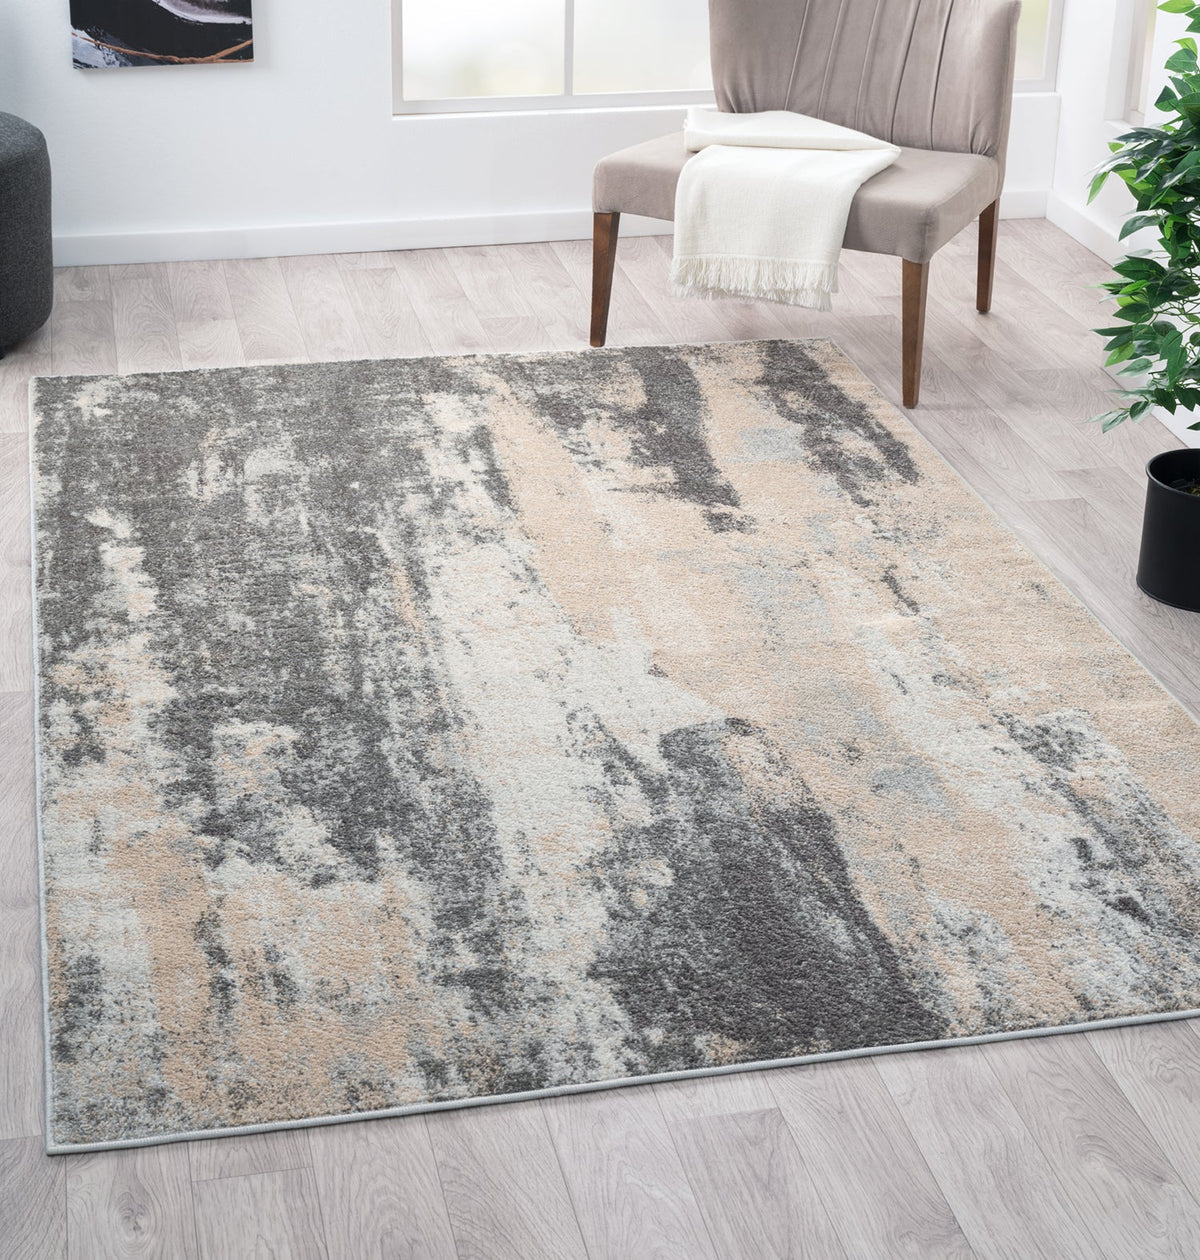 Living Room Rug Oxford Collection Grey Cream